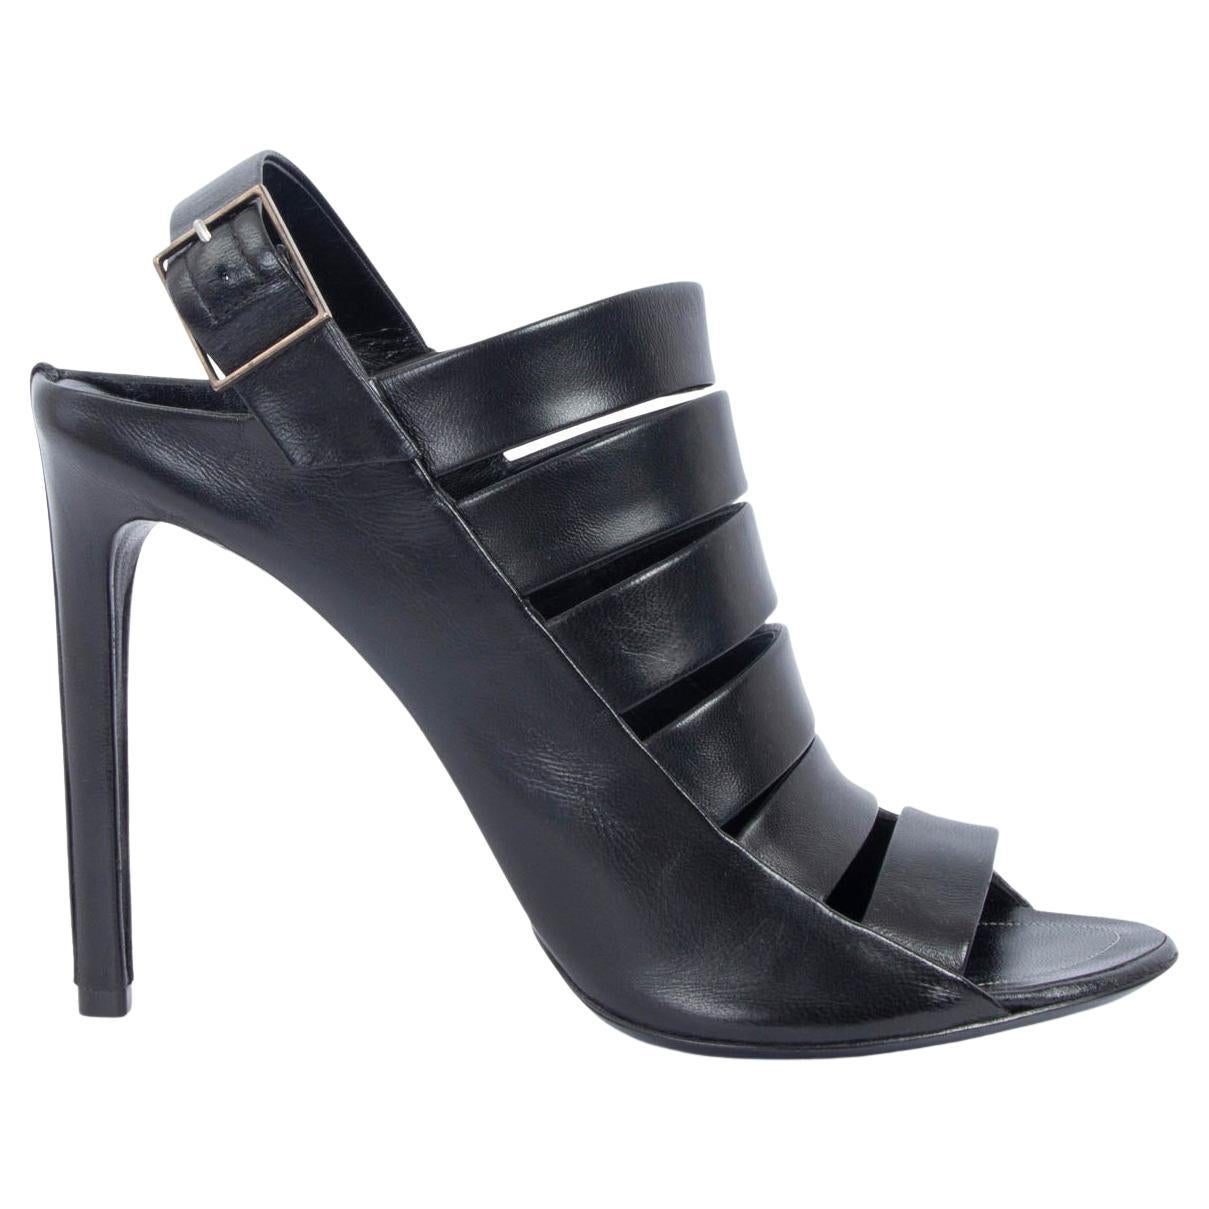 BALENCIAGA black leather STRAPPY Sandals Shoes 38 For Sale